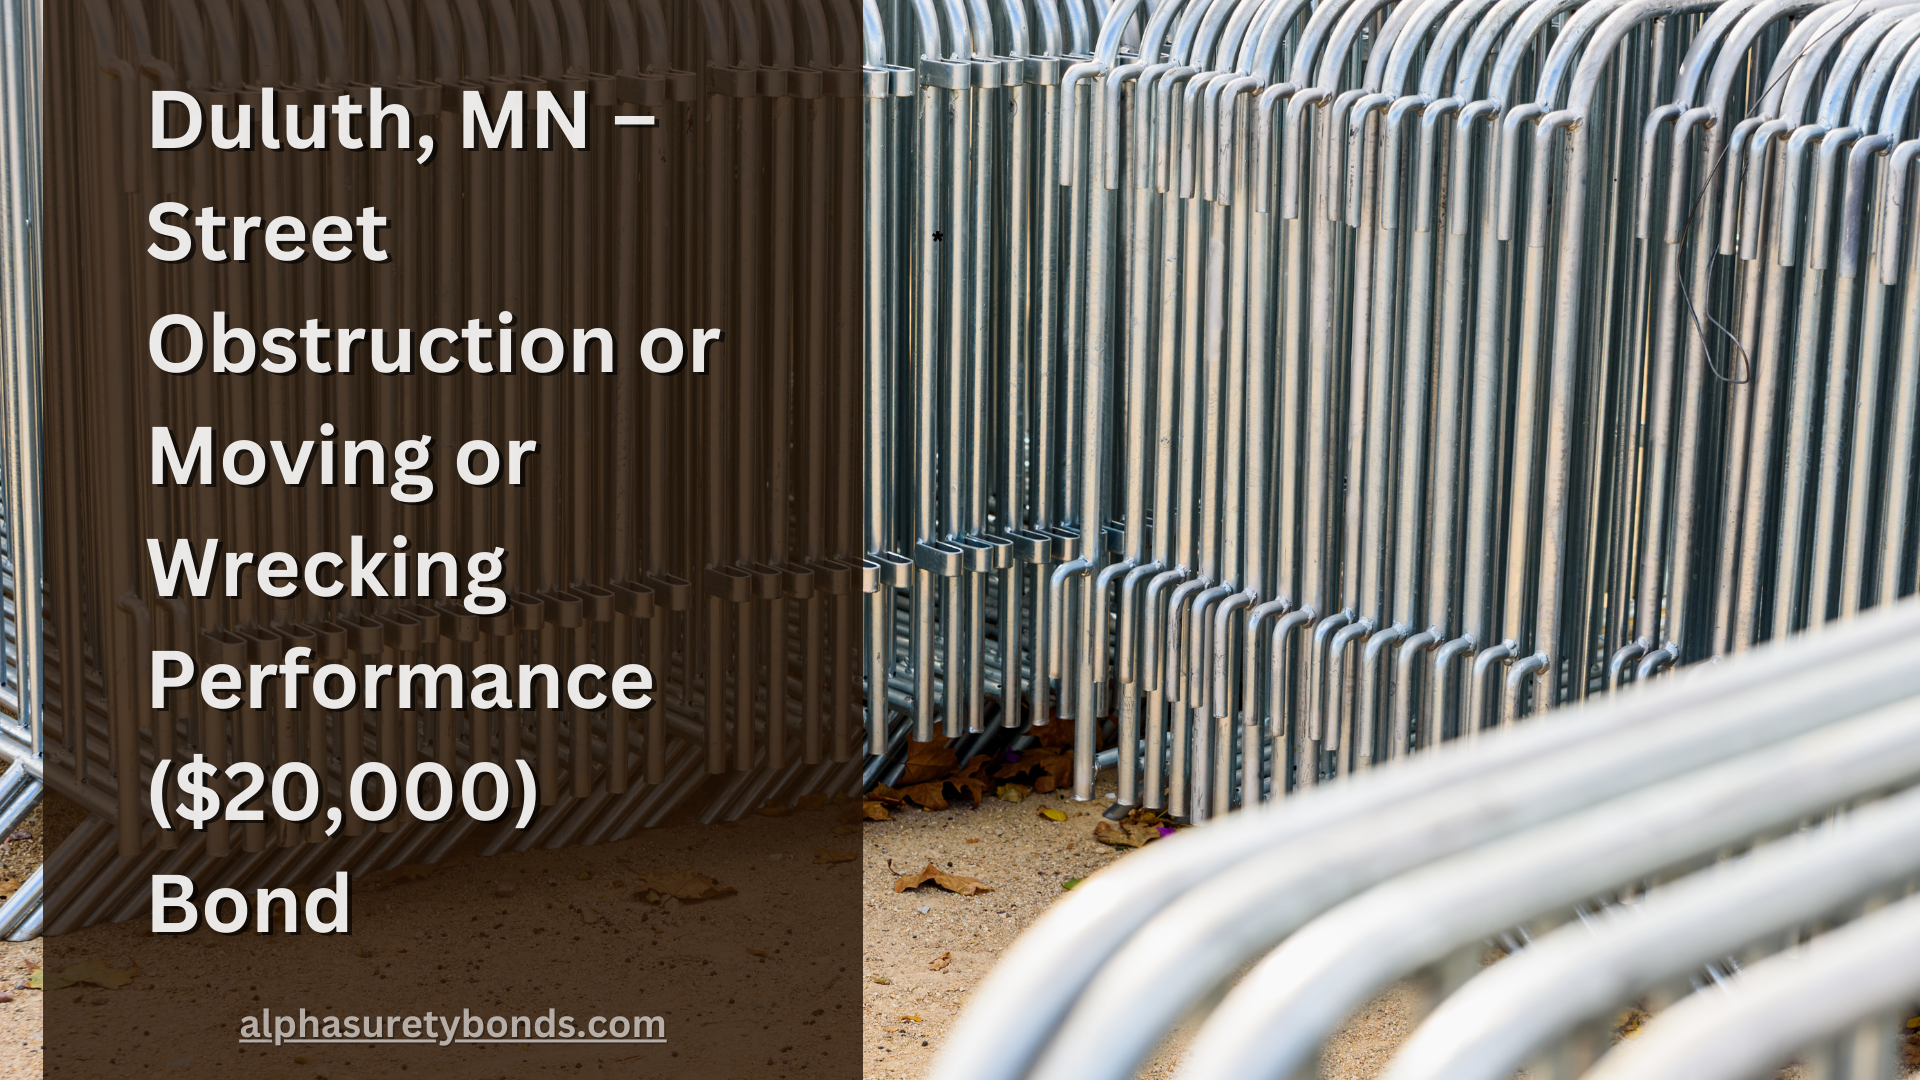 Duluth, MN – Street Obstruction or Moving or Wrecking Performance ($20,000) Bond